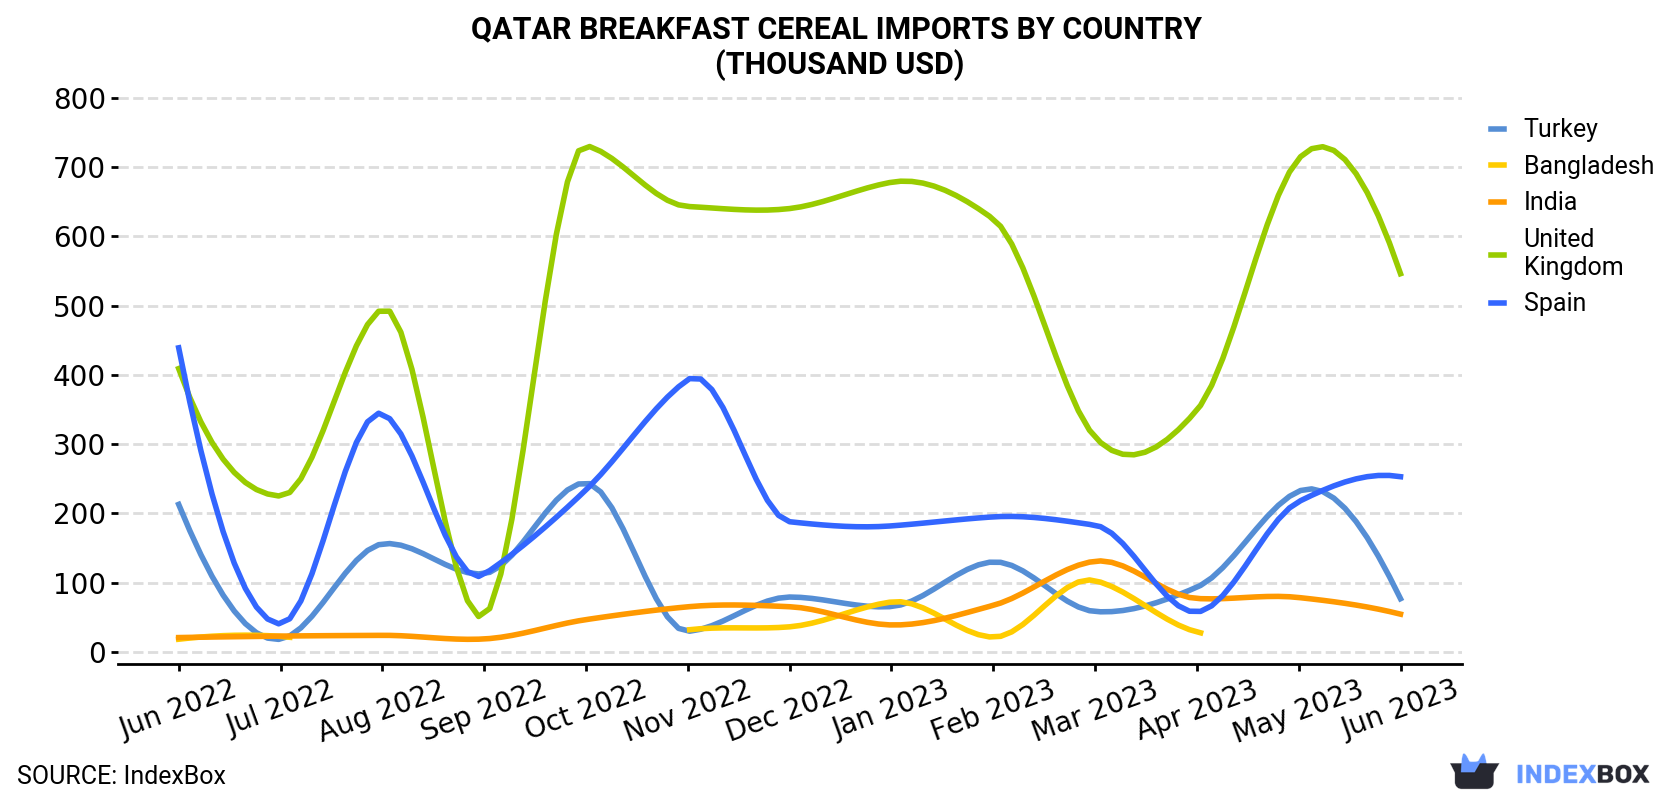 Qatar Breakfast Cereal Imports By Country (Thousand USD)